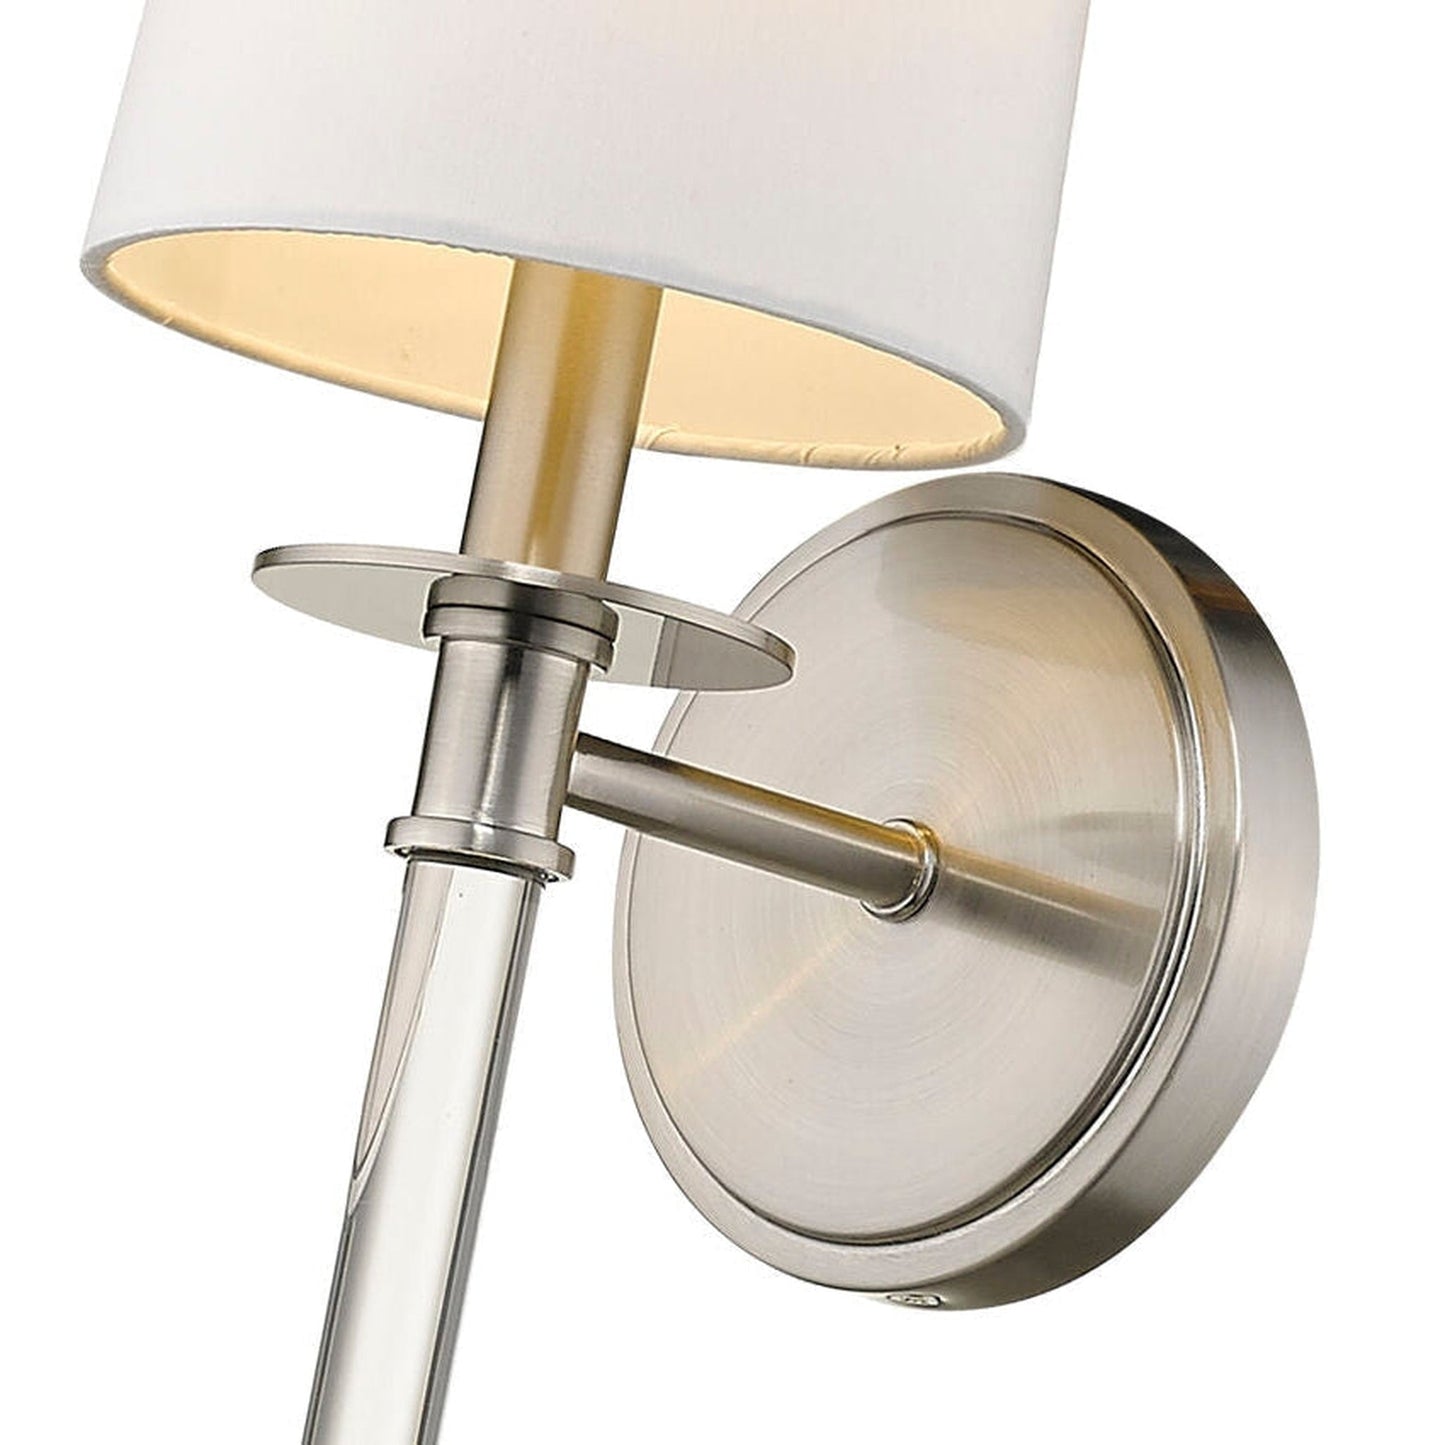 Z-Lite Mila 6" 1-Light Brushed Nickel Wall Sconce With White Fabric Shade